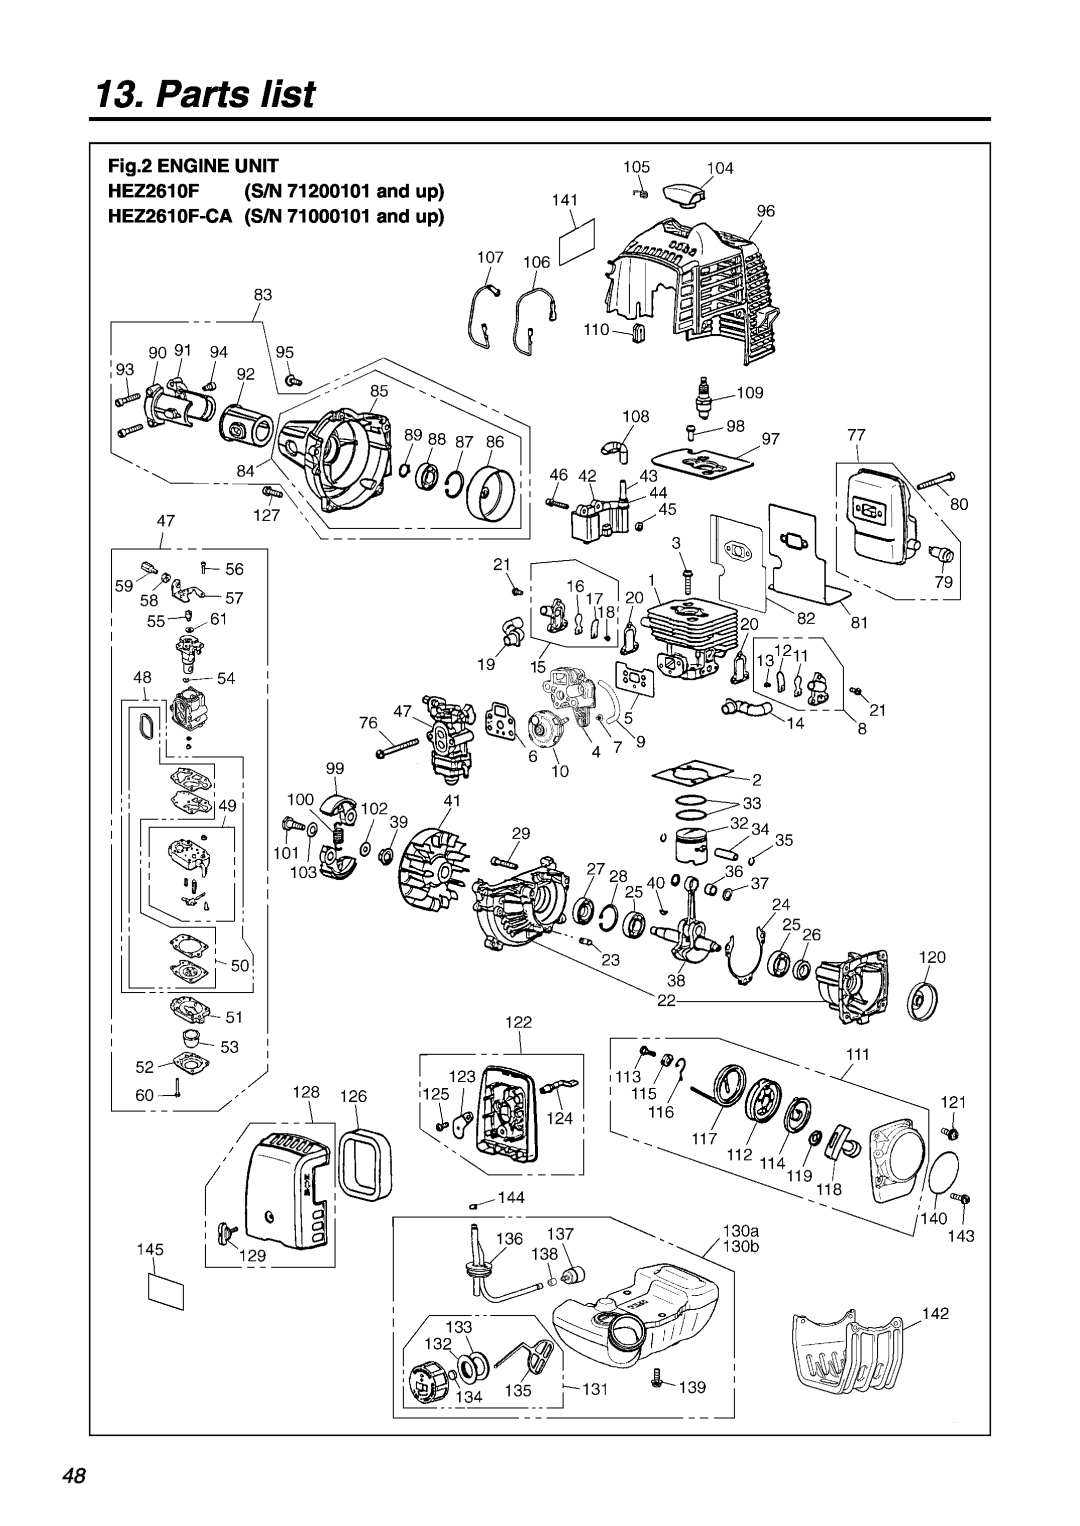 Zenoah manual Parts list, Engine Unit, S/N 71200101 and up, HEZ2610F-CA S/N 71000101 and up 